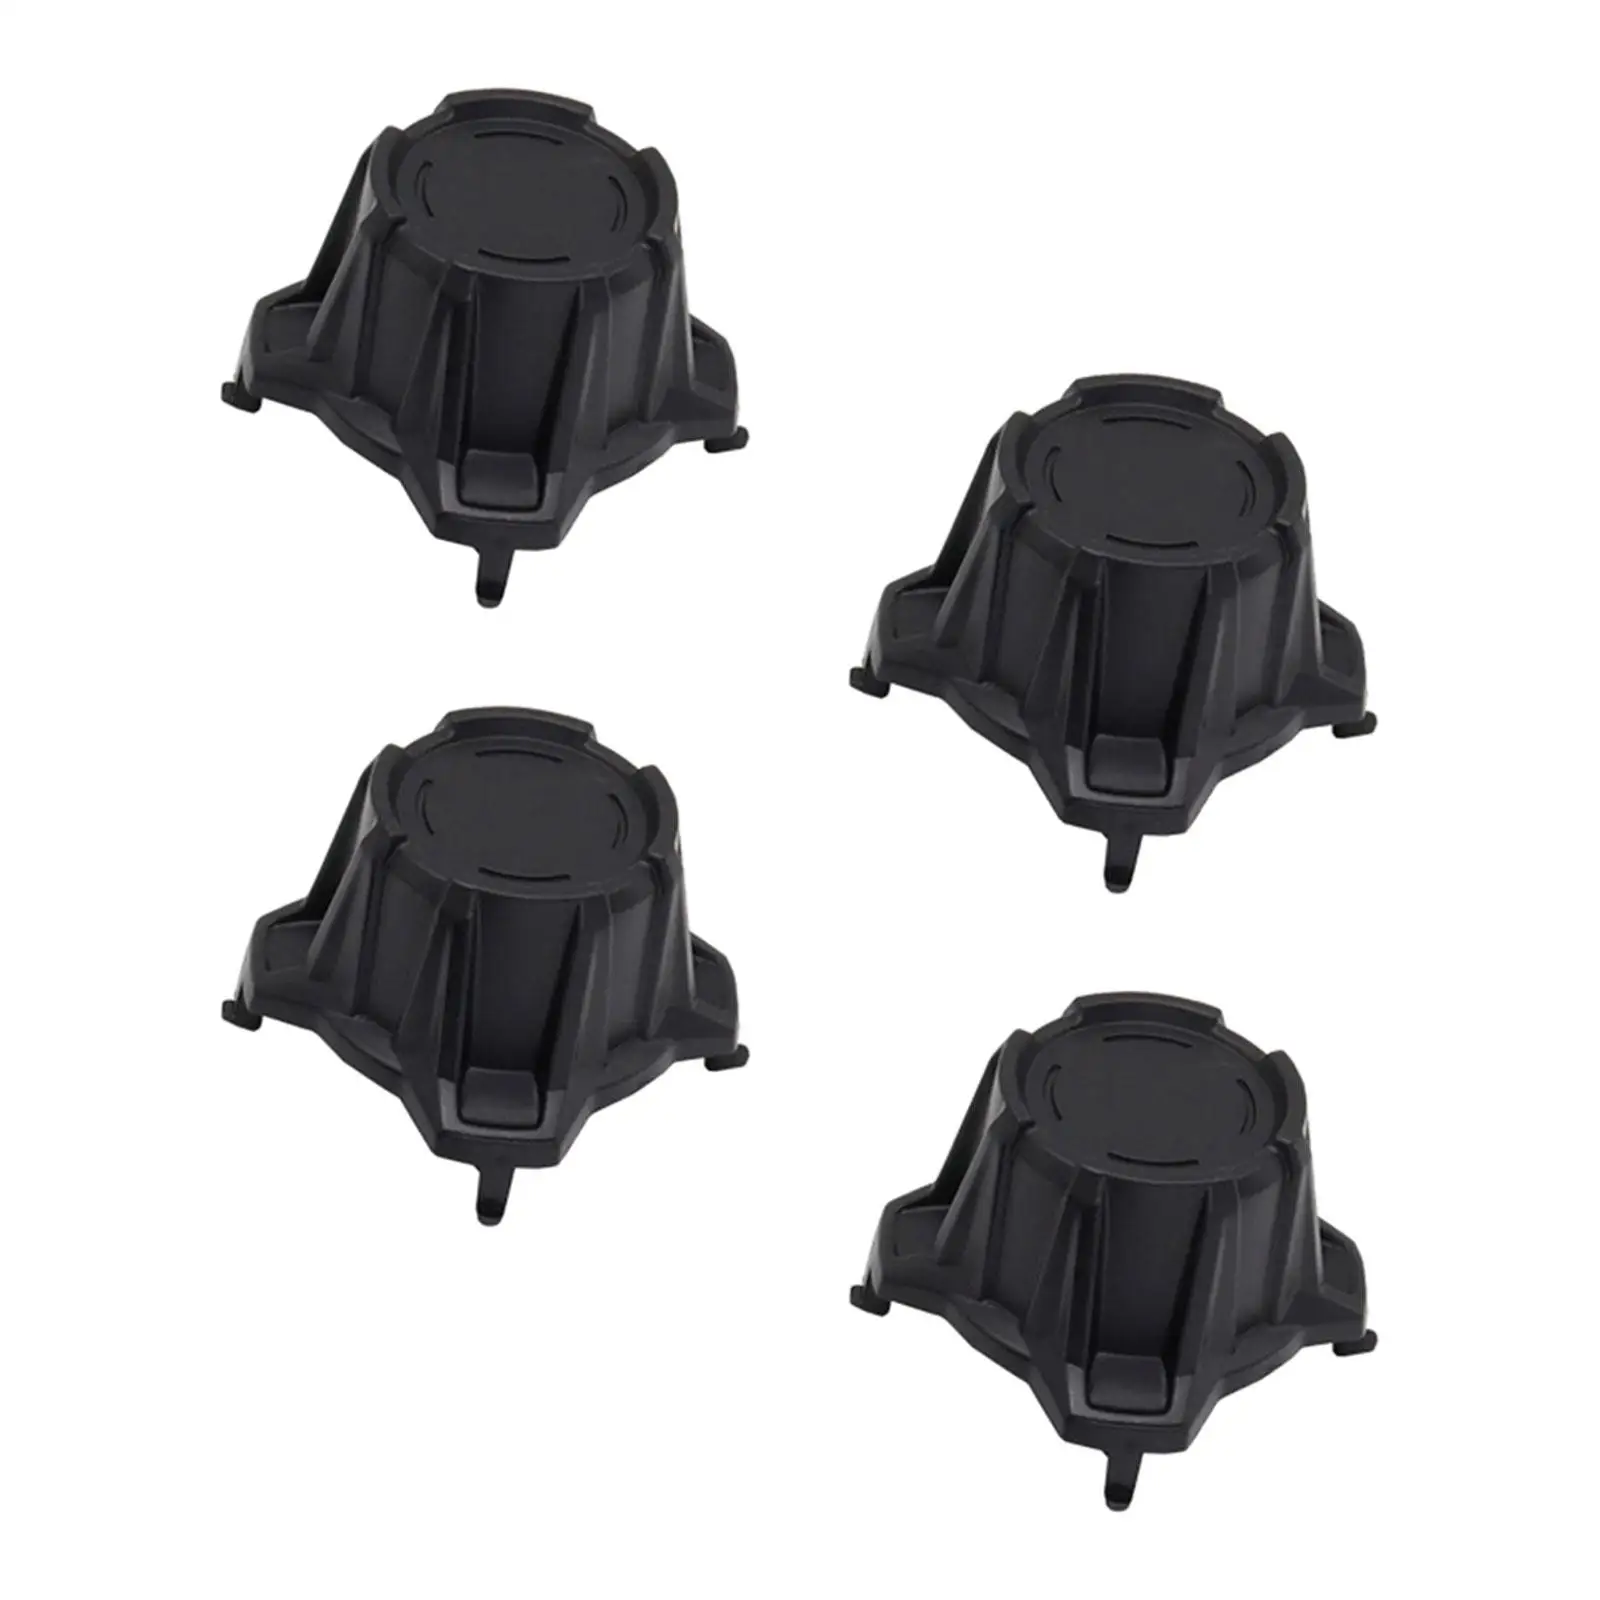 4x Wheel Center Hub Caps Motorcycle Modification for x3 2017-2020 Direct Replacement Stable Performance Repairing Accessory